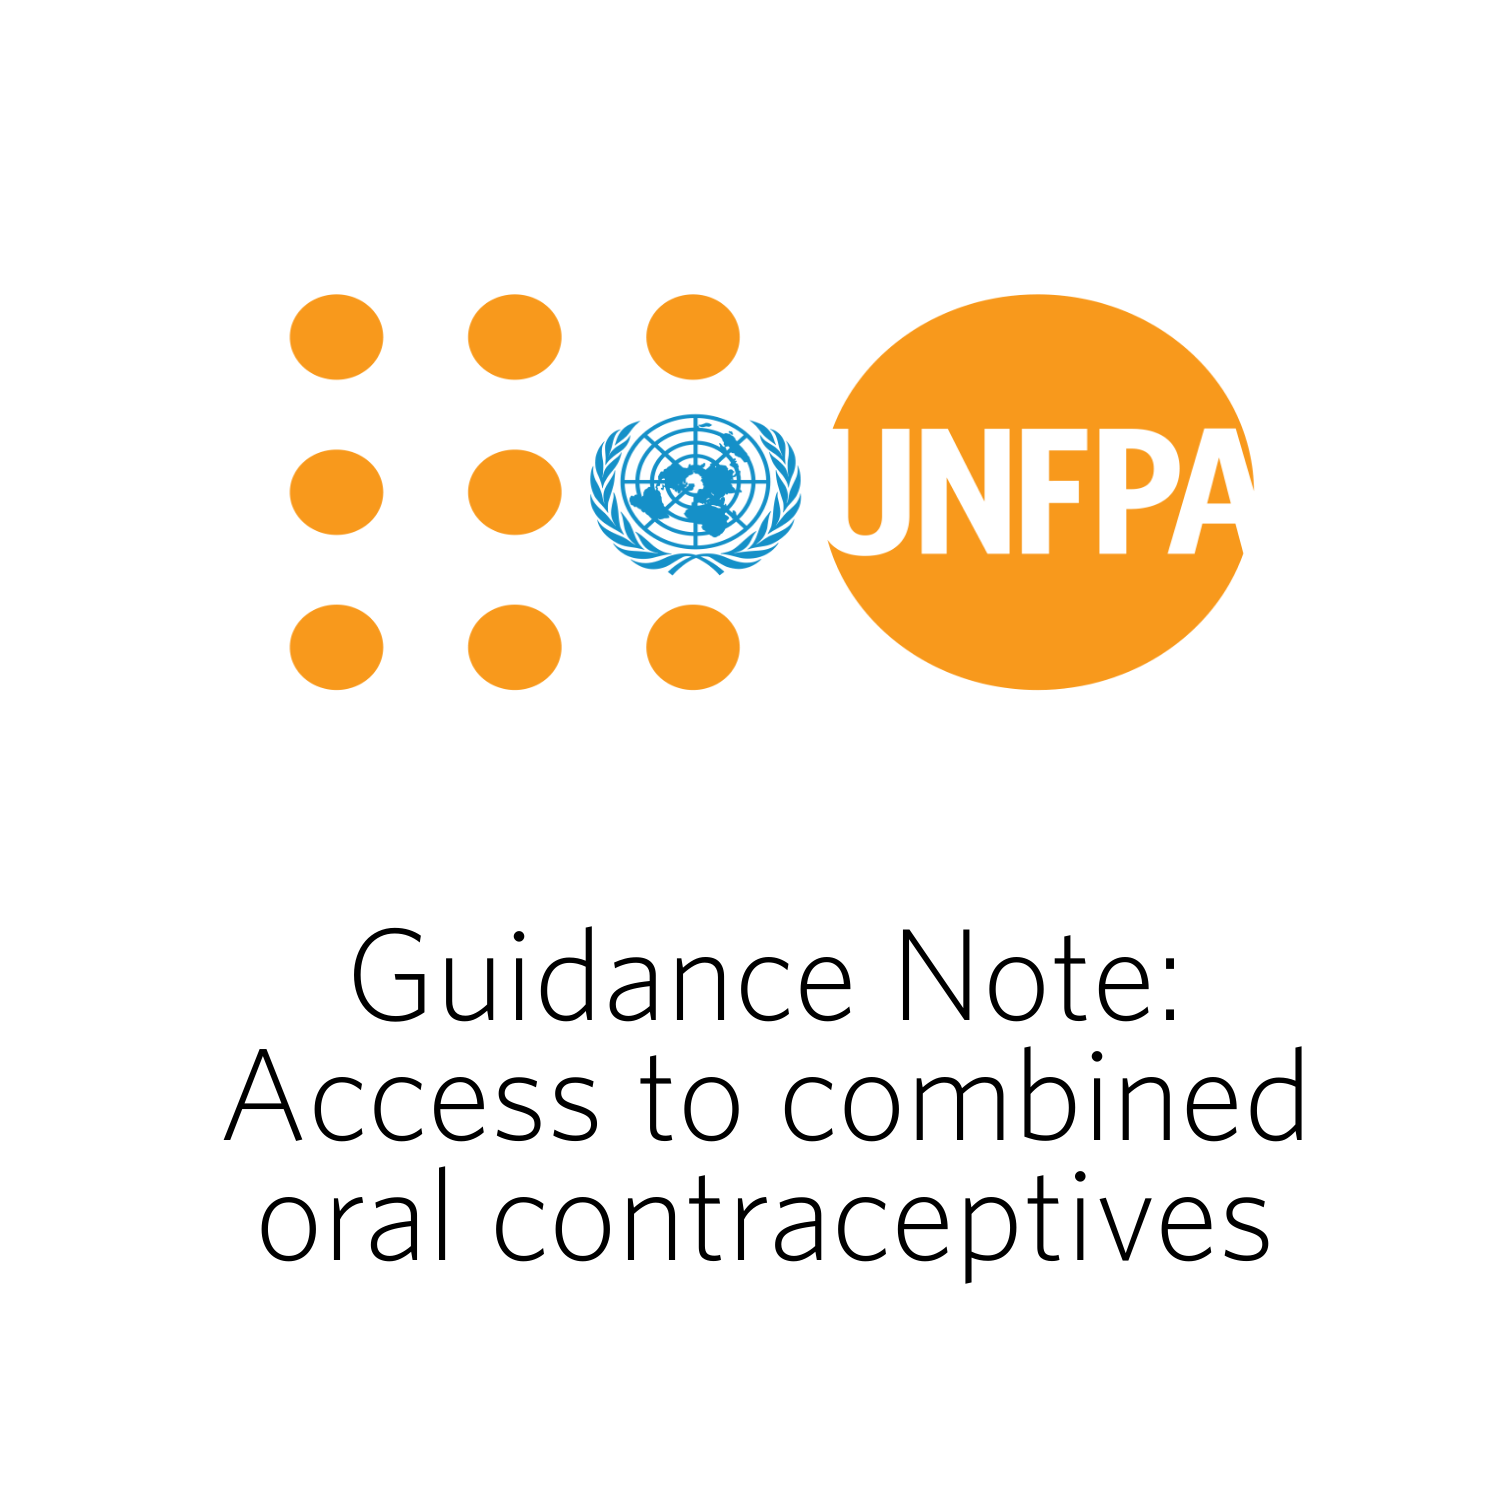 Safeguarging access to combined oral contraceptives